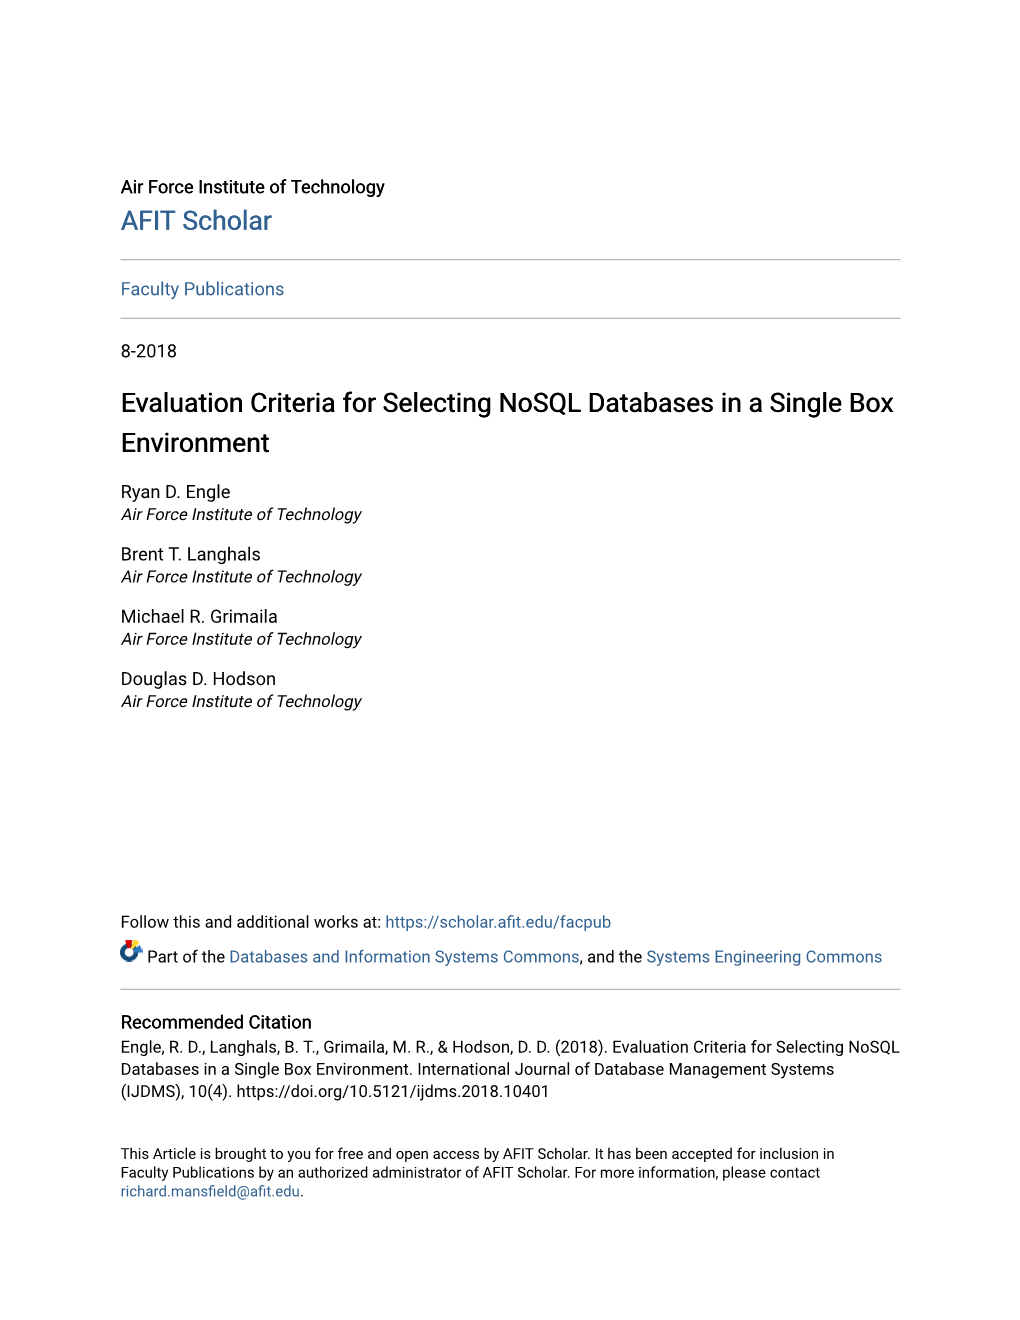 Evaluation Criteria for Selecting Nosql Databases in a Single Box Environment